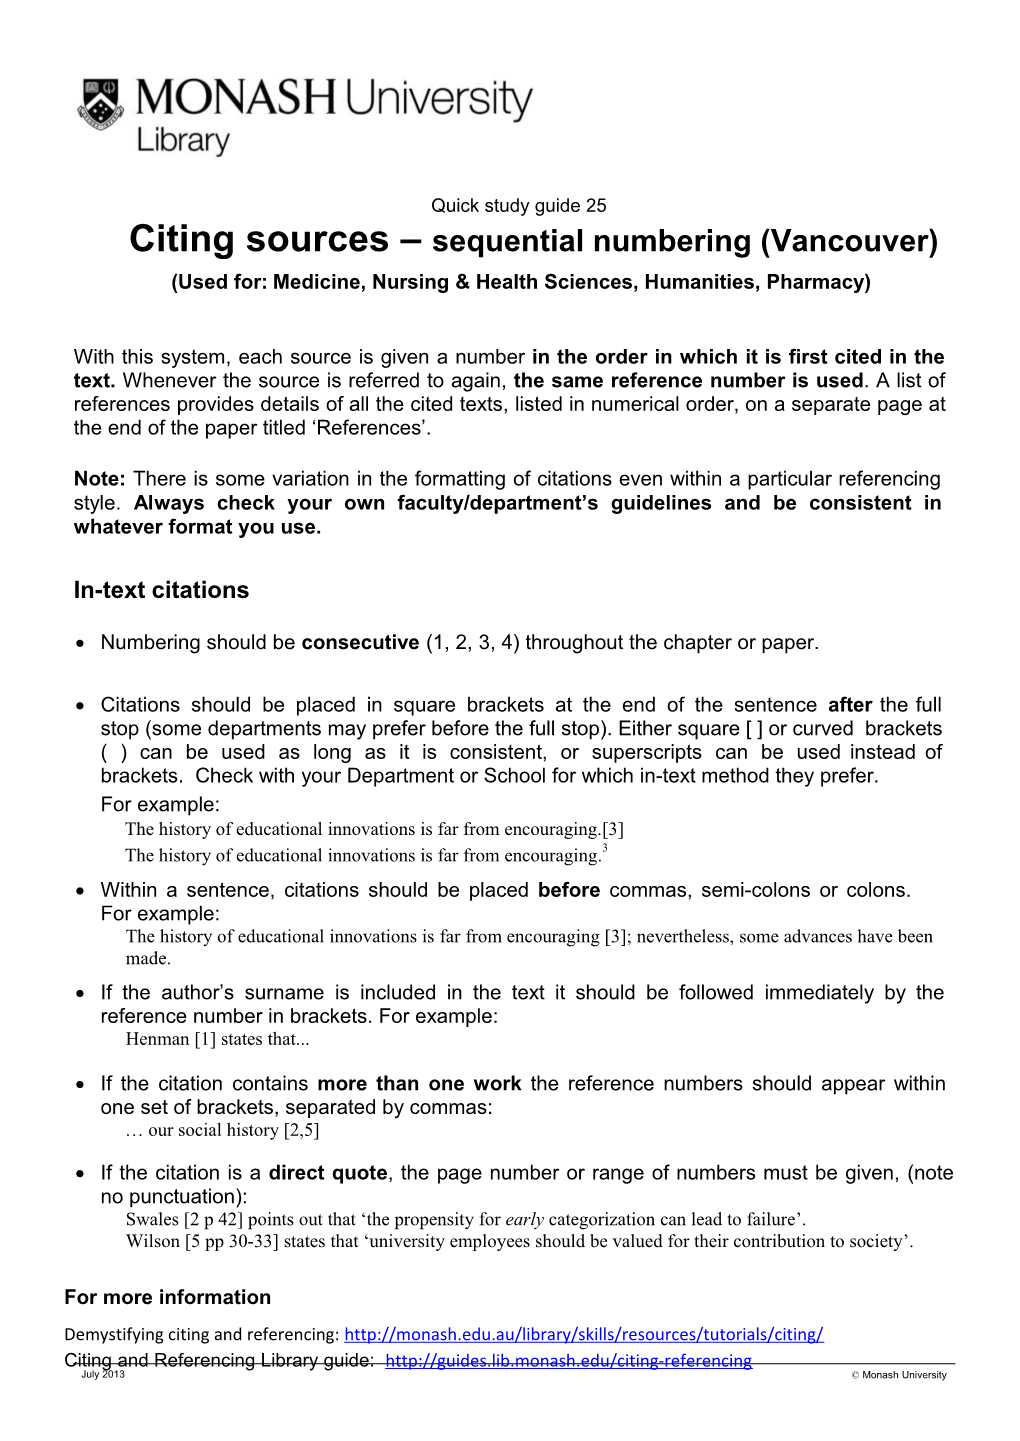 Citing Sources - Sequential Numbering (Vancouver)